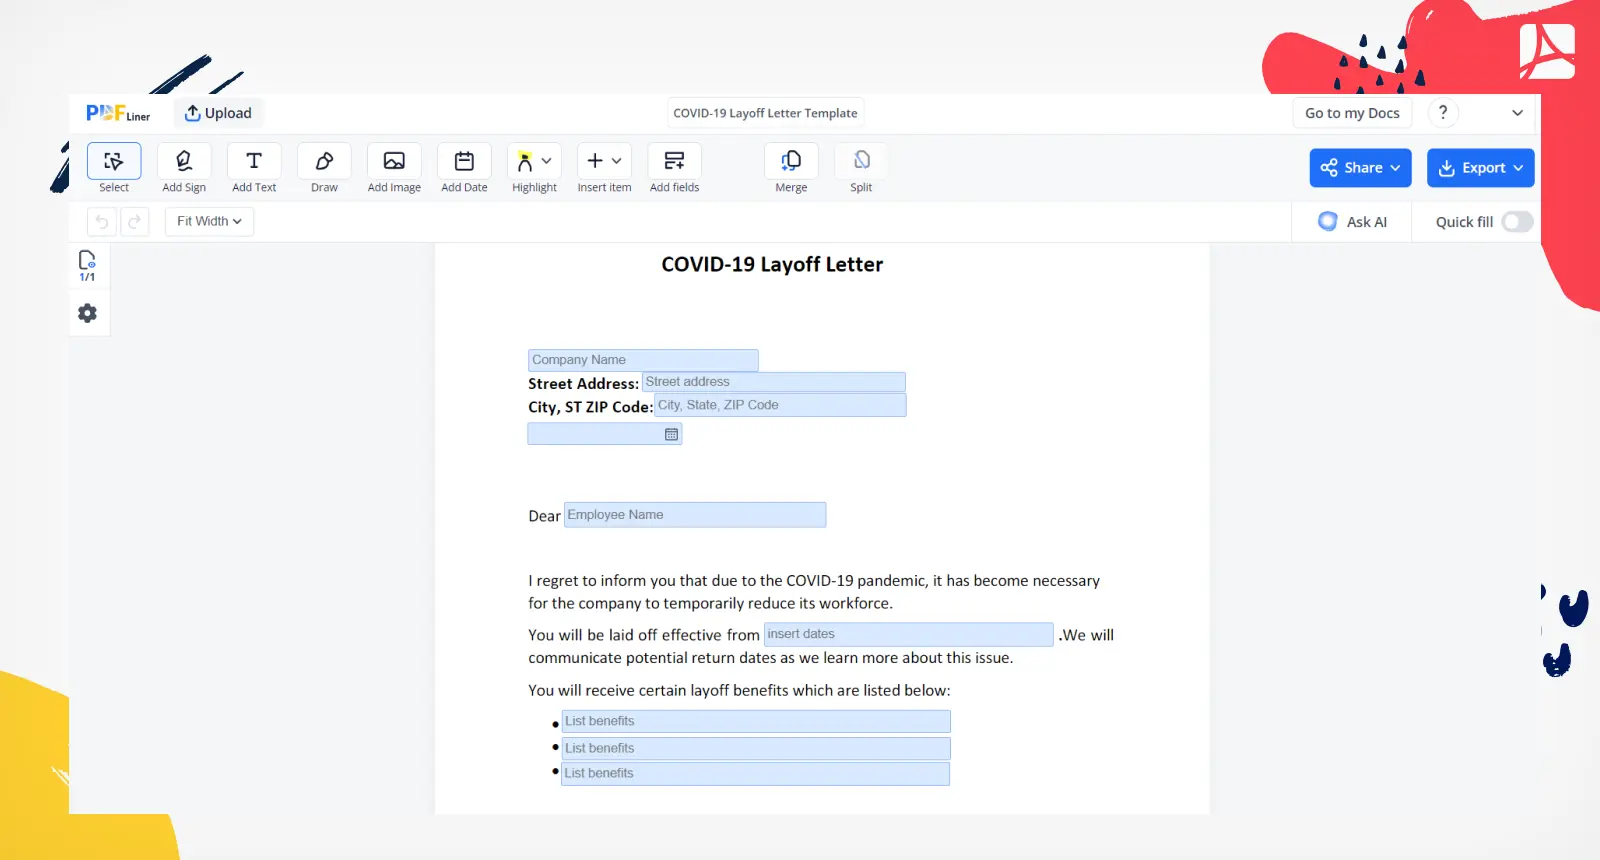 COVID-19 Layoff Letter Screenshot